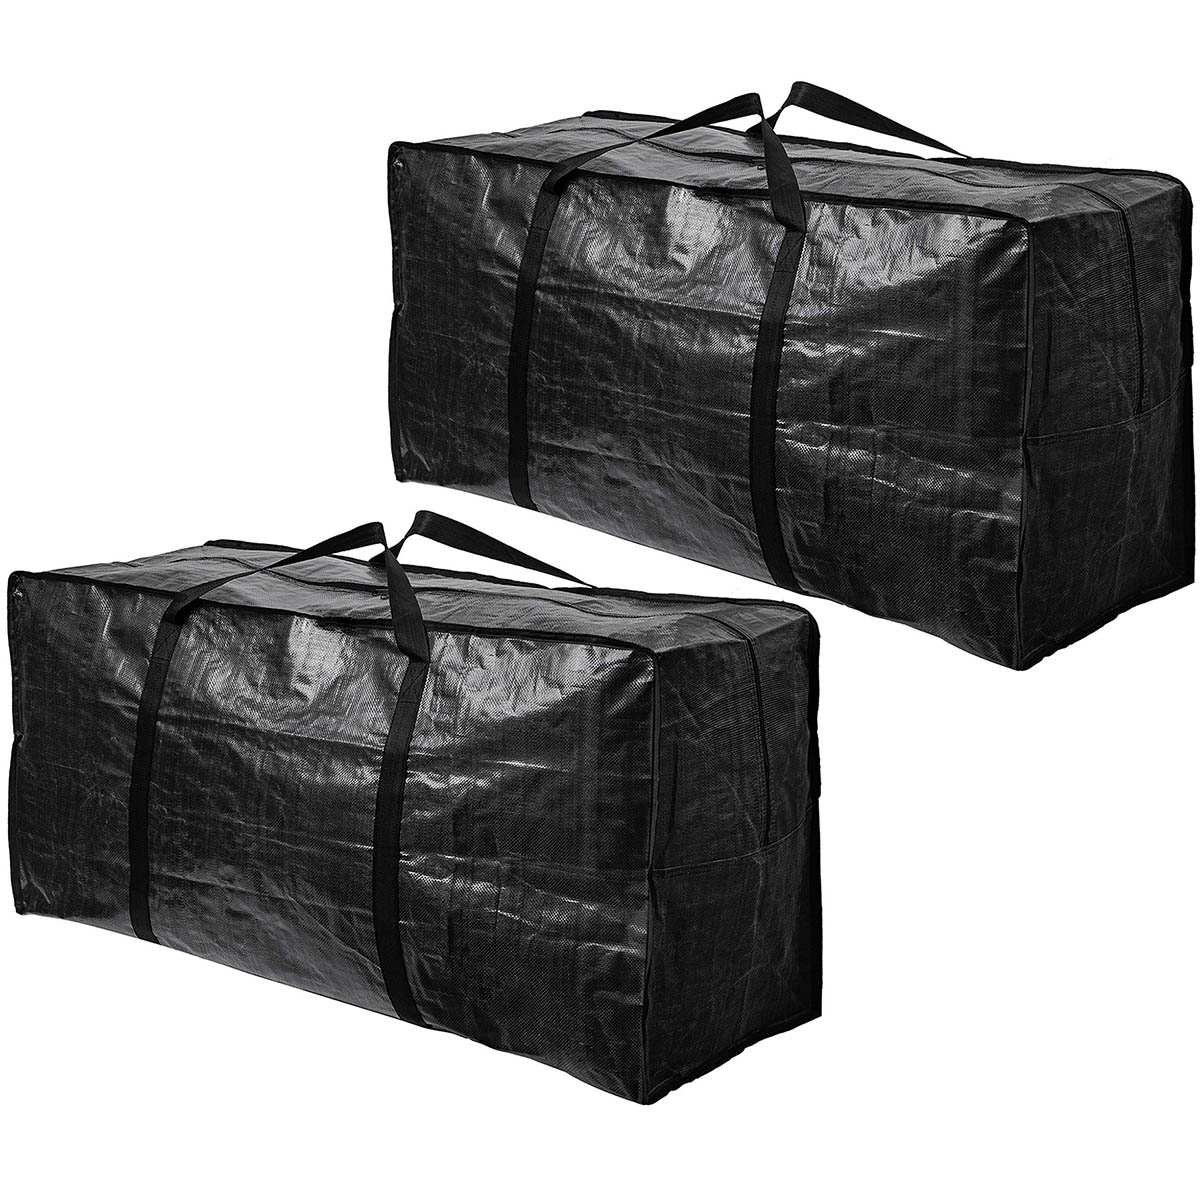 What Is The Largest Size Storage Bag